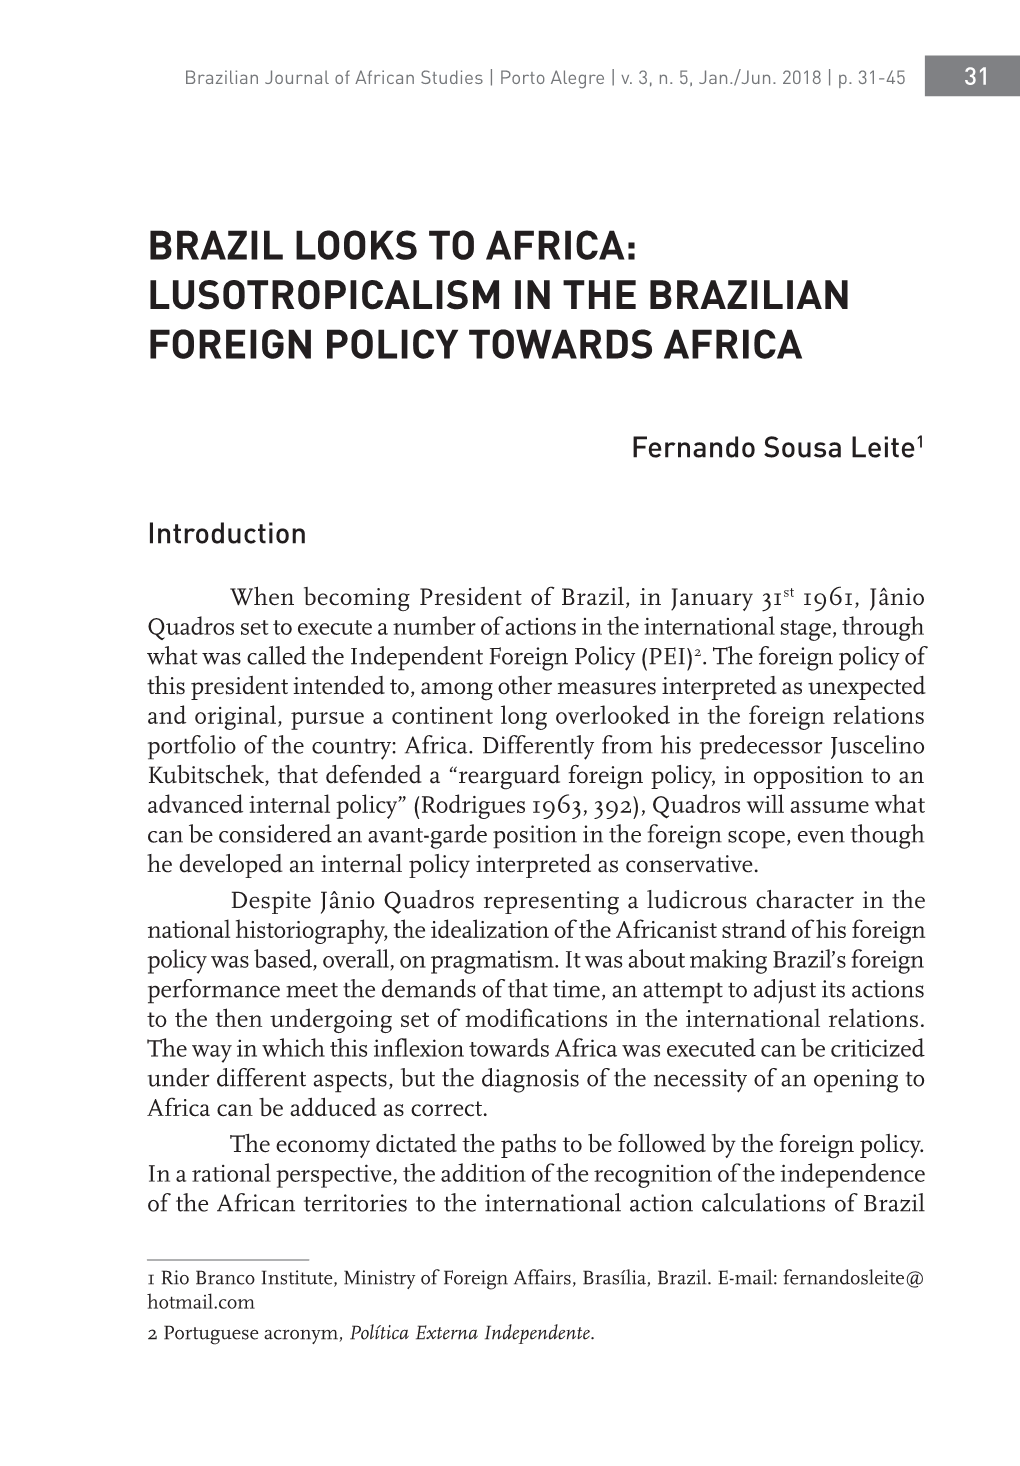 Brazil Looks to Africa: Lusotropicalism in the Brazilian Foreign Policy Towards Africa